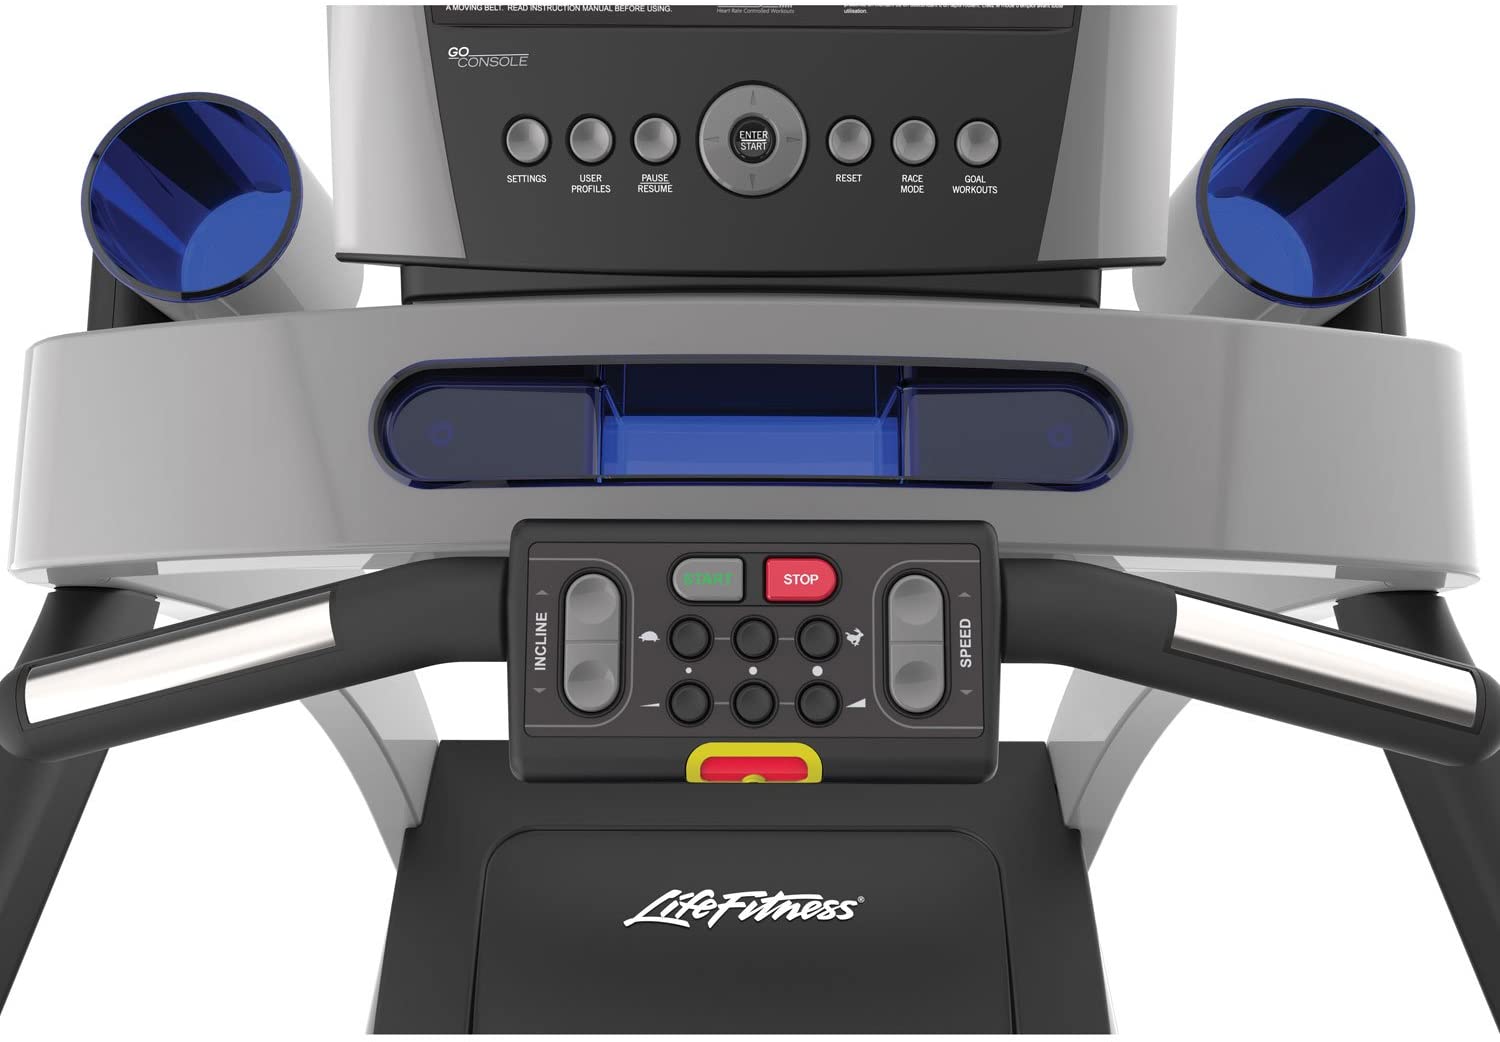 Life Fitness T5 Treadmill with Go Console controls